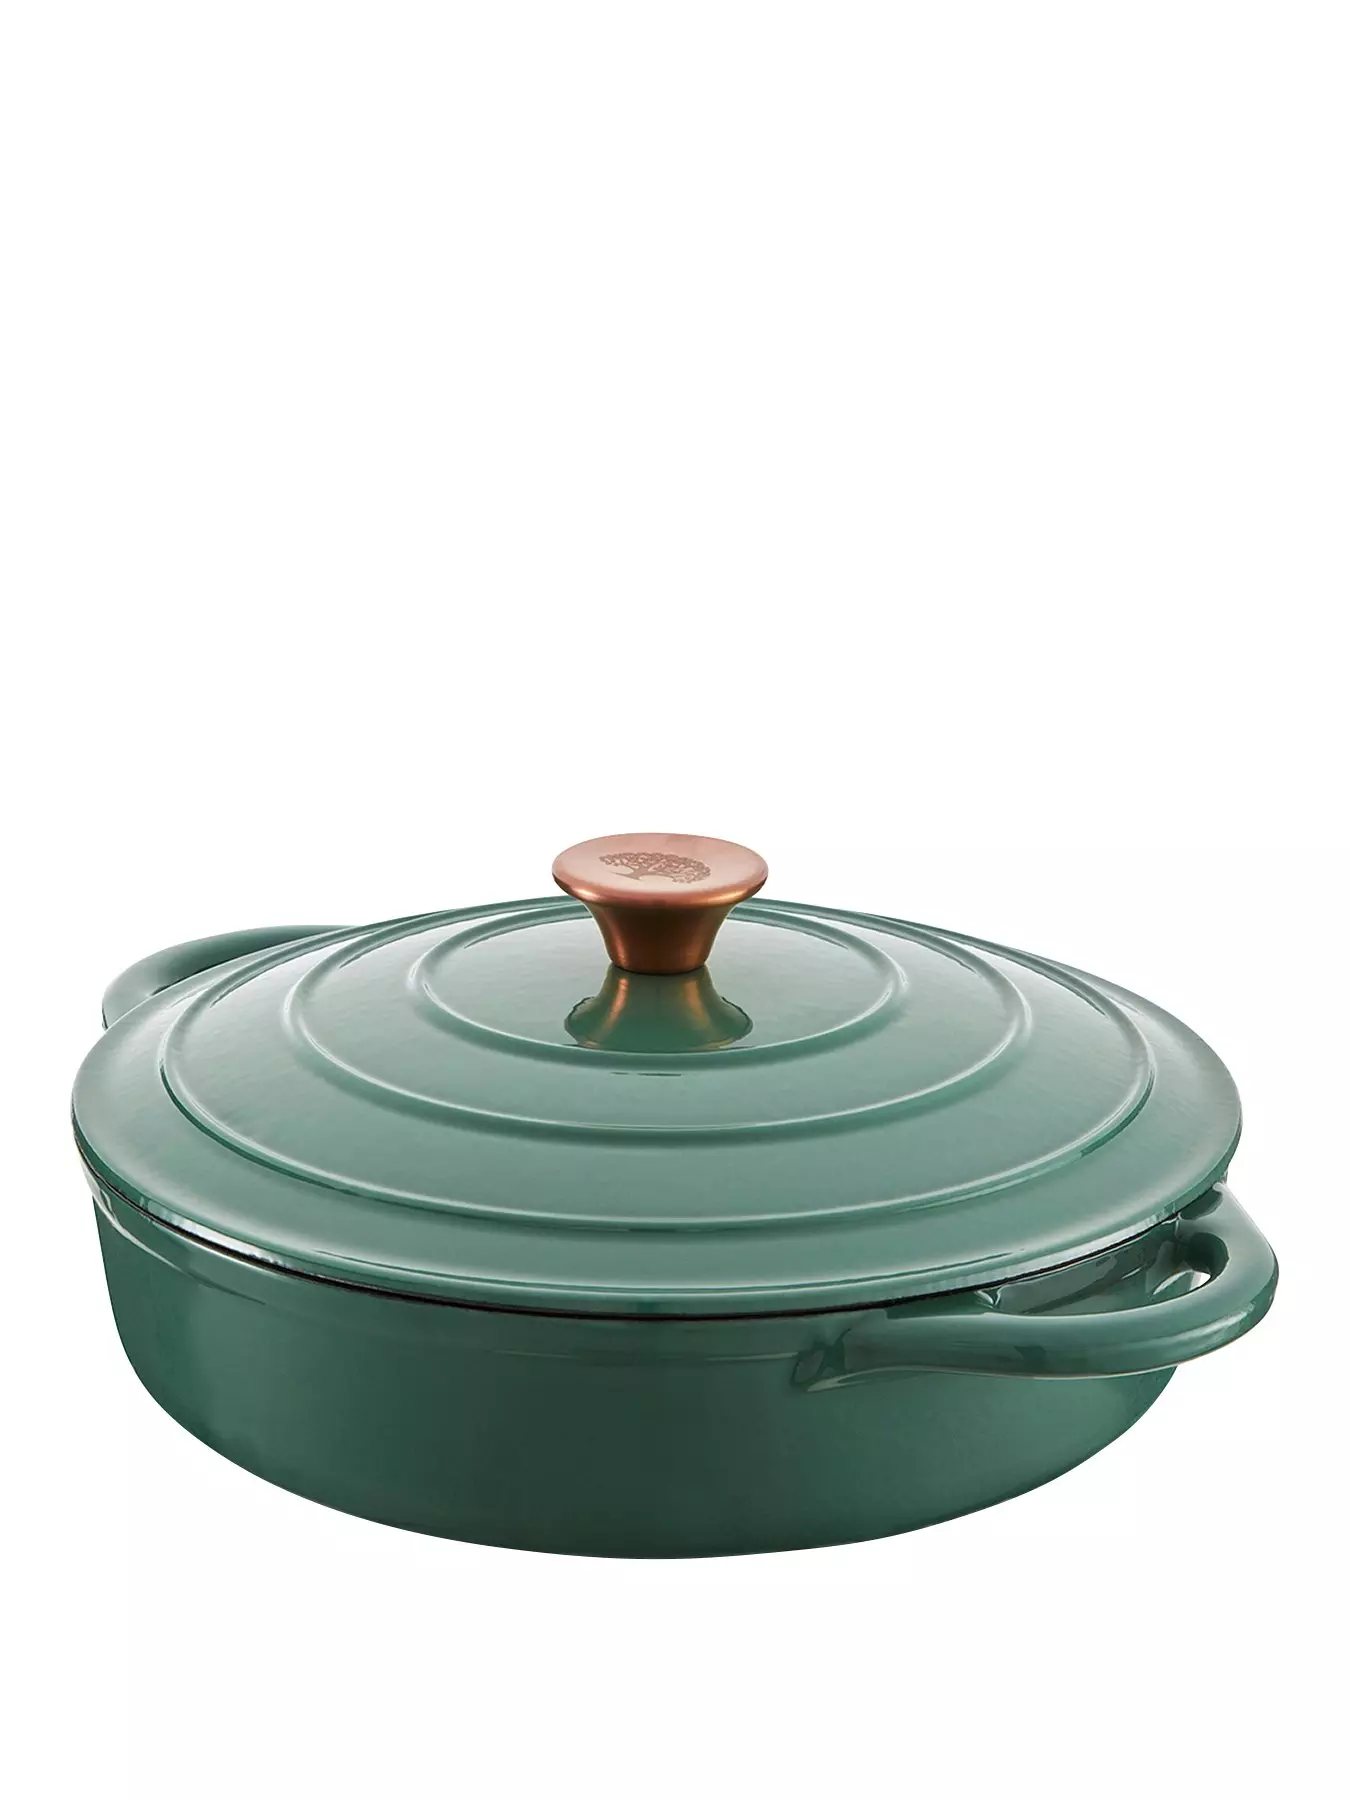 Tefal LOV Enamelled Cast Iron Shallow Casserole Dish with Lid, 28cm, 3.8L,  Dutch Oven, All Hob Types, Cast Iron Pot, Cooking Pots, Dishwasher Safe